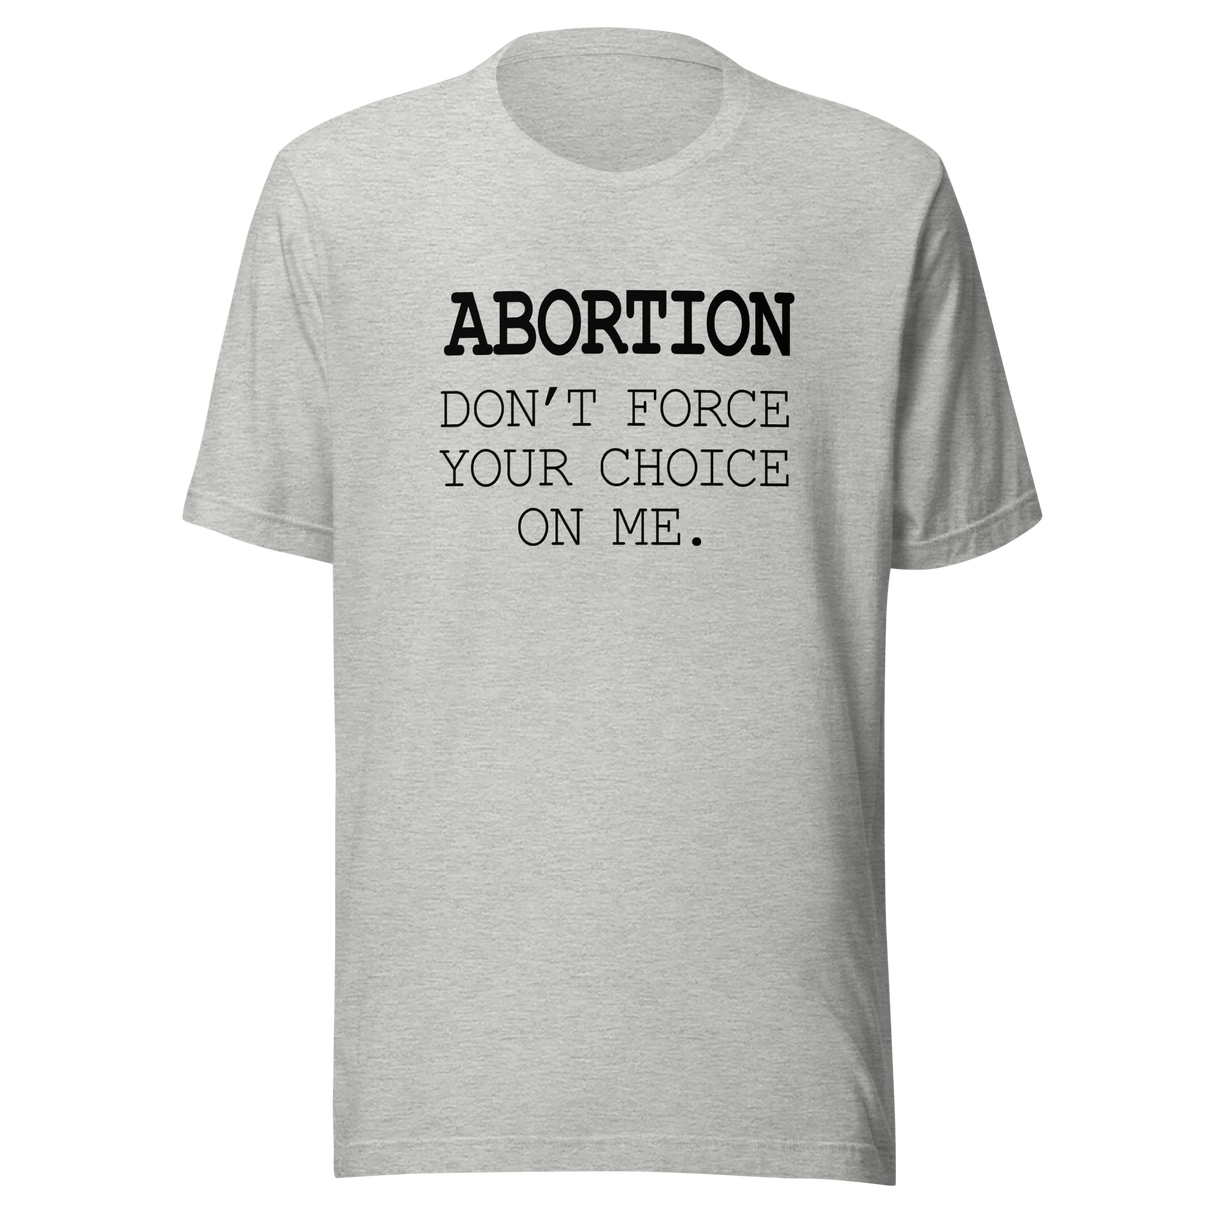 abortion-dont-force-your-choice-on-me-abortion-tee-uterus-t-shirt-women-tee-womens-rights-t-shirt-healthcare-tee#color_athletic-heather